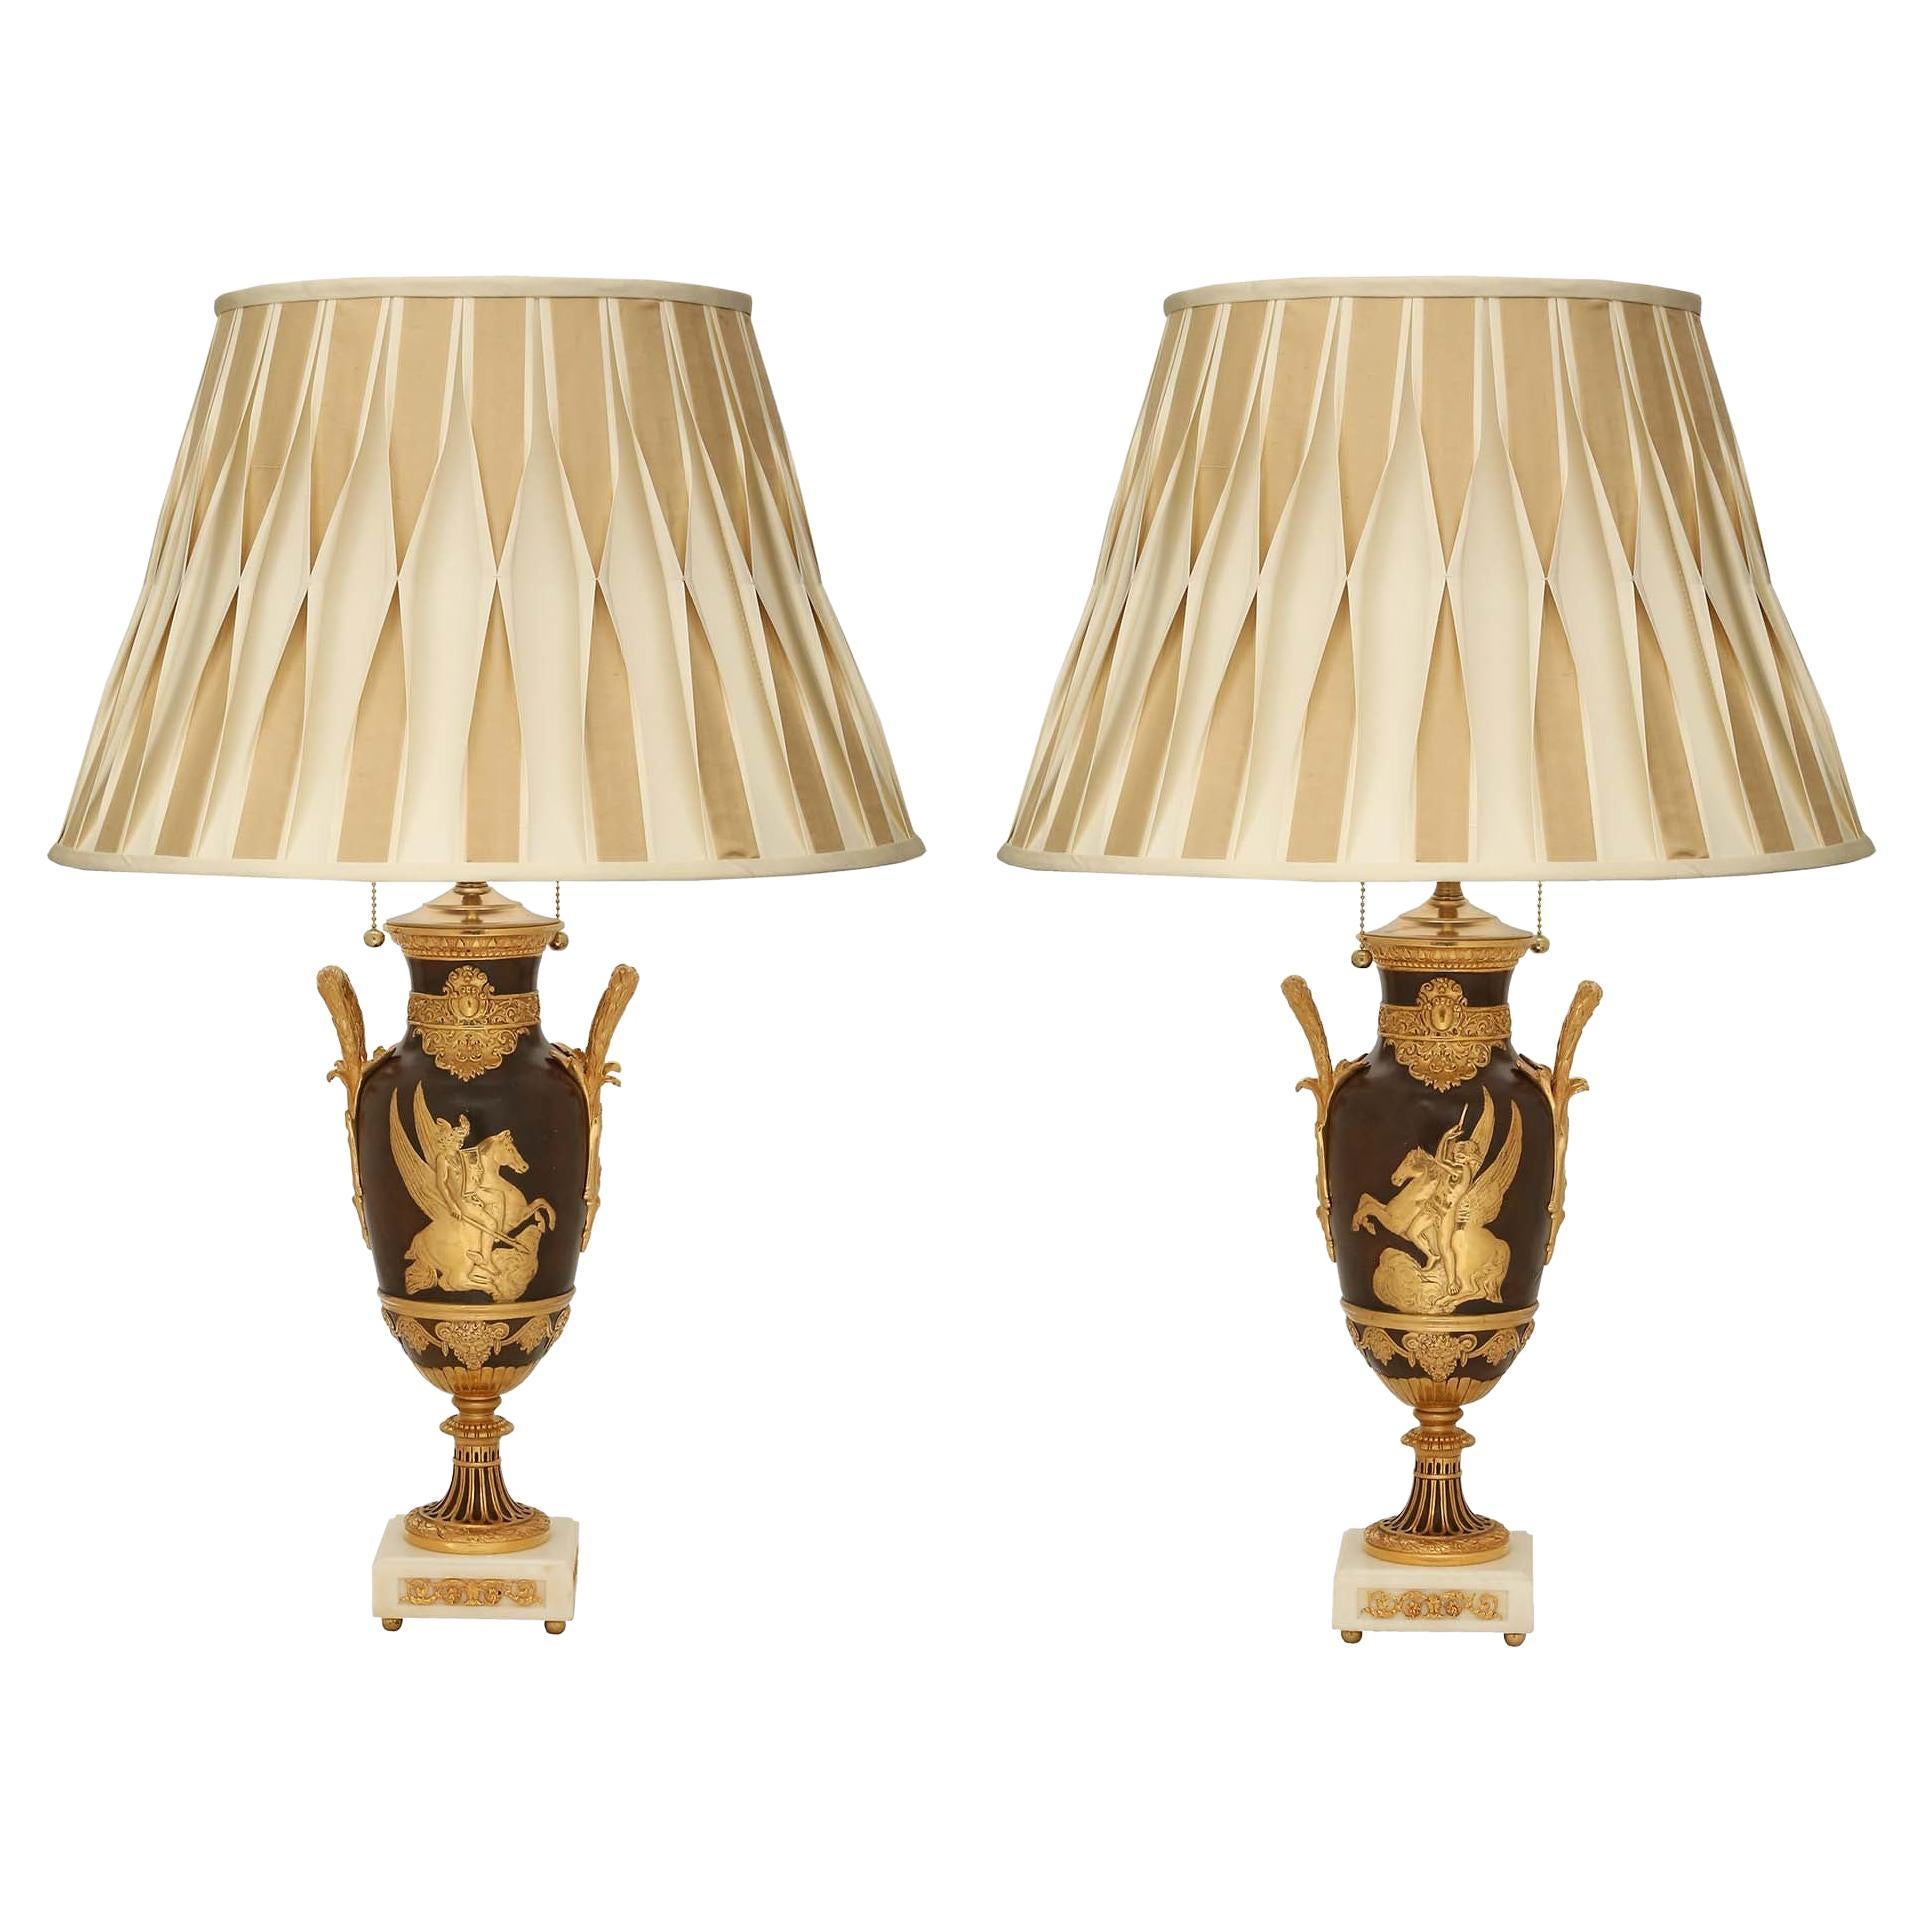 Pair of French 19th Century Neoclassical St. Bronze and Ormolu Lamps